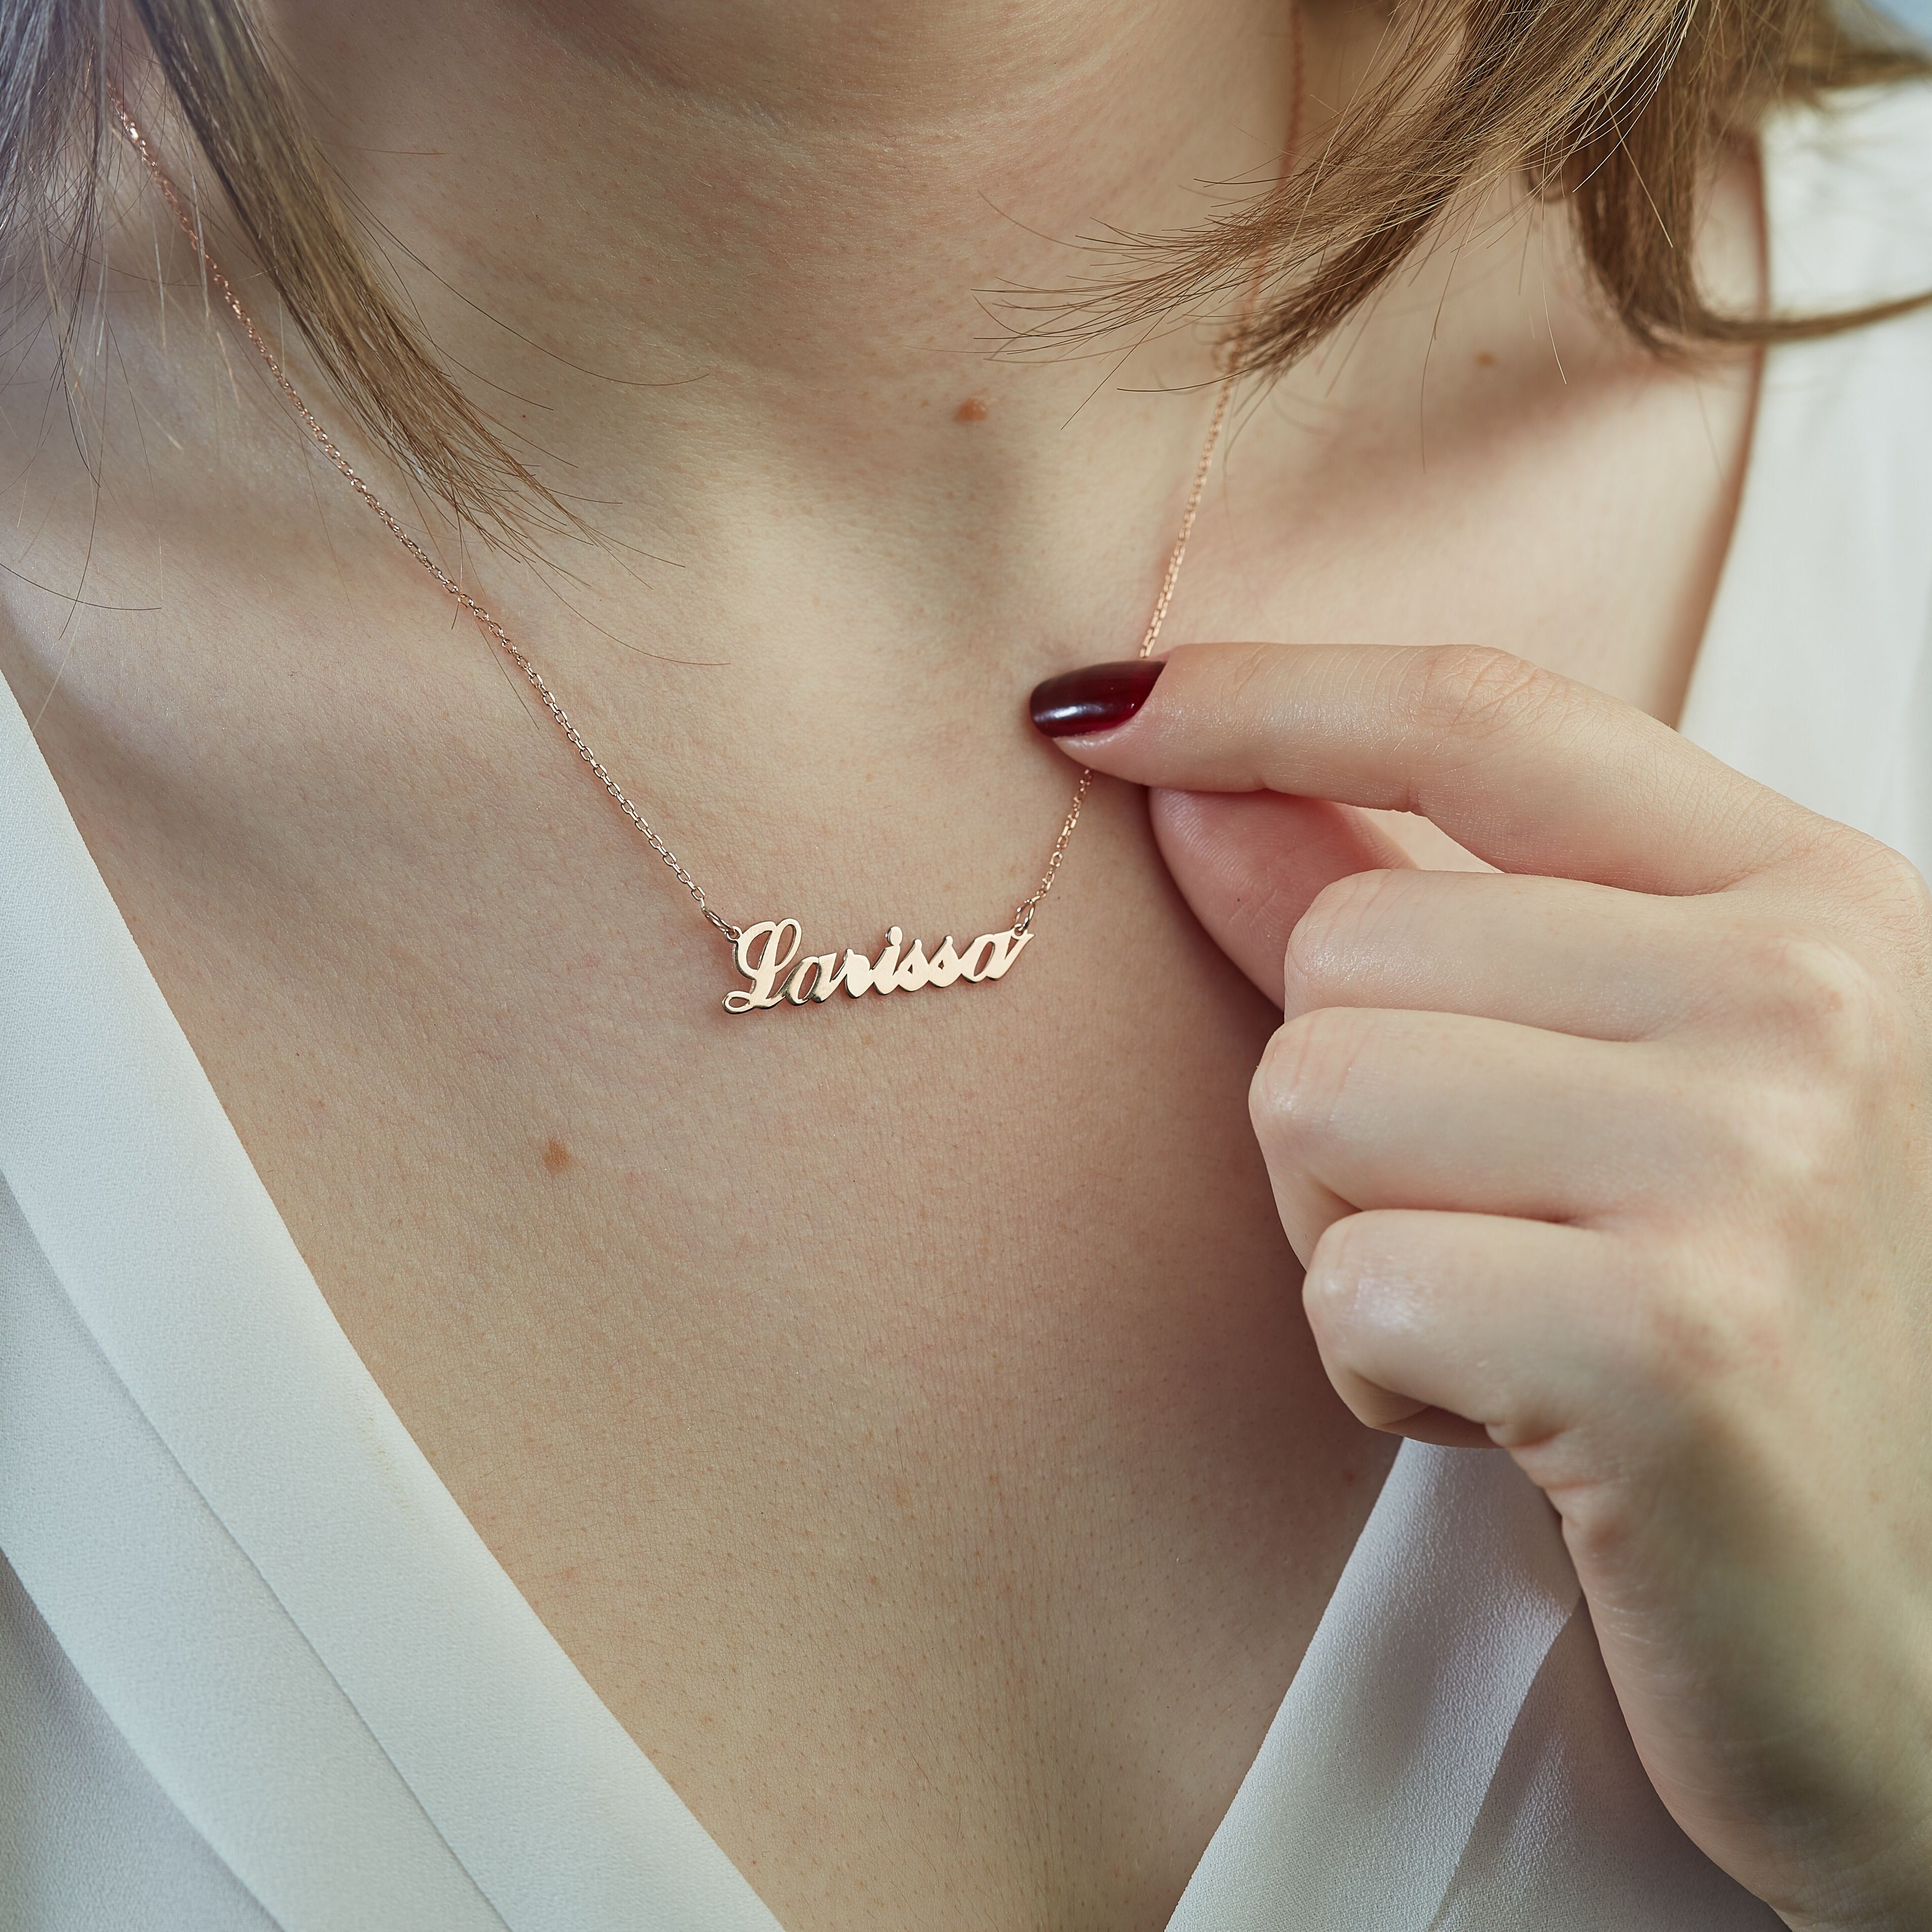 Woman wearing a Rose Gold Plated Name Necklace on Chain